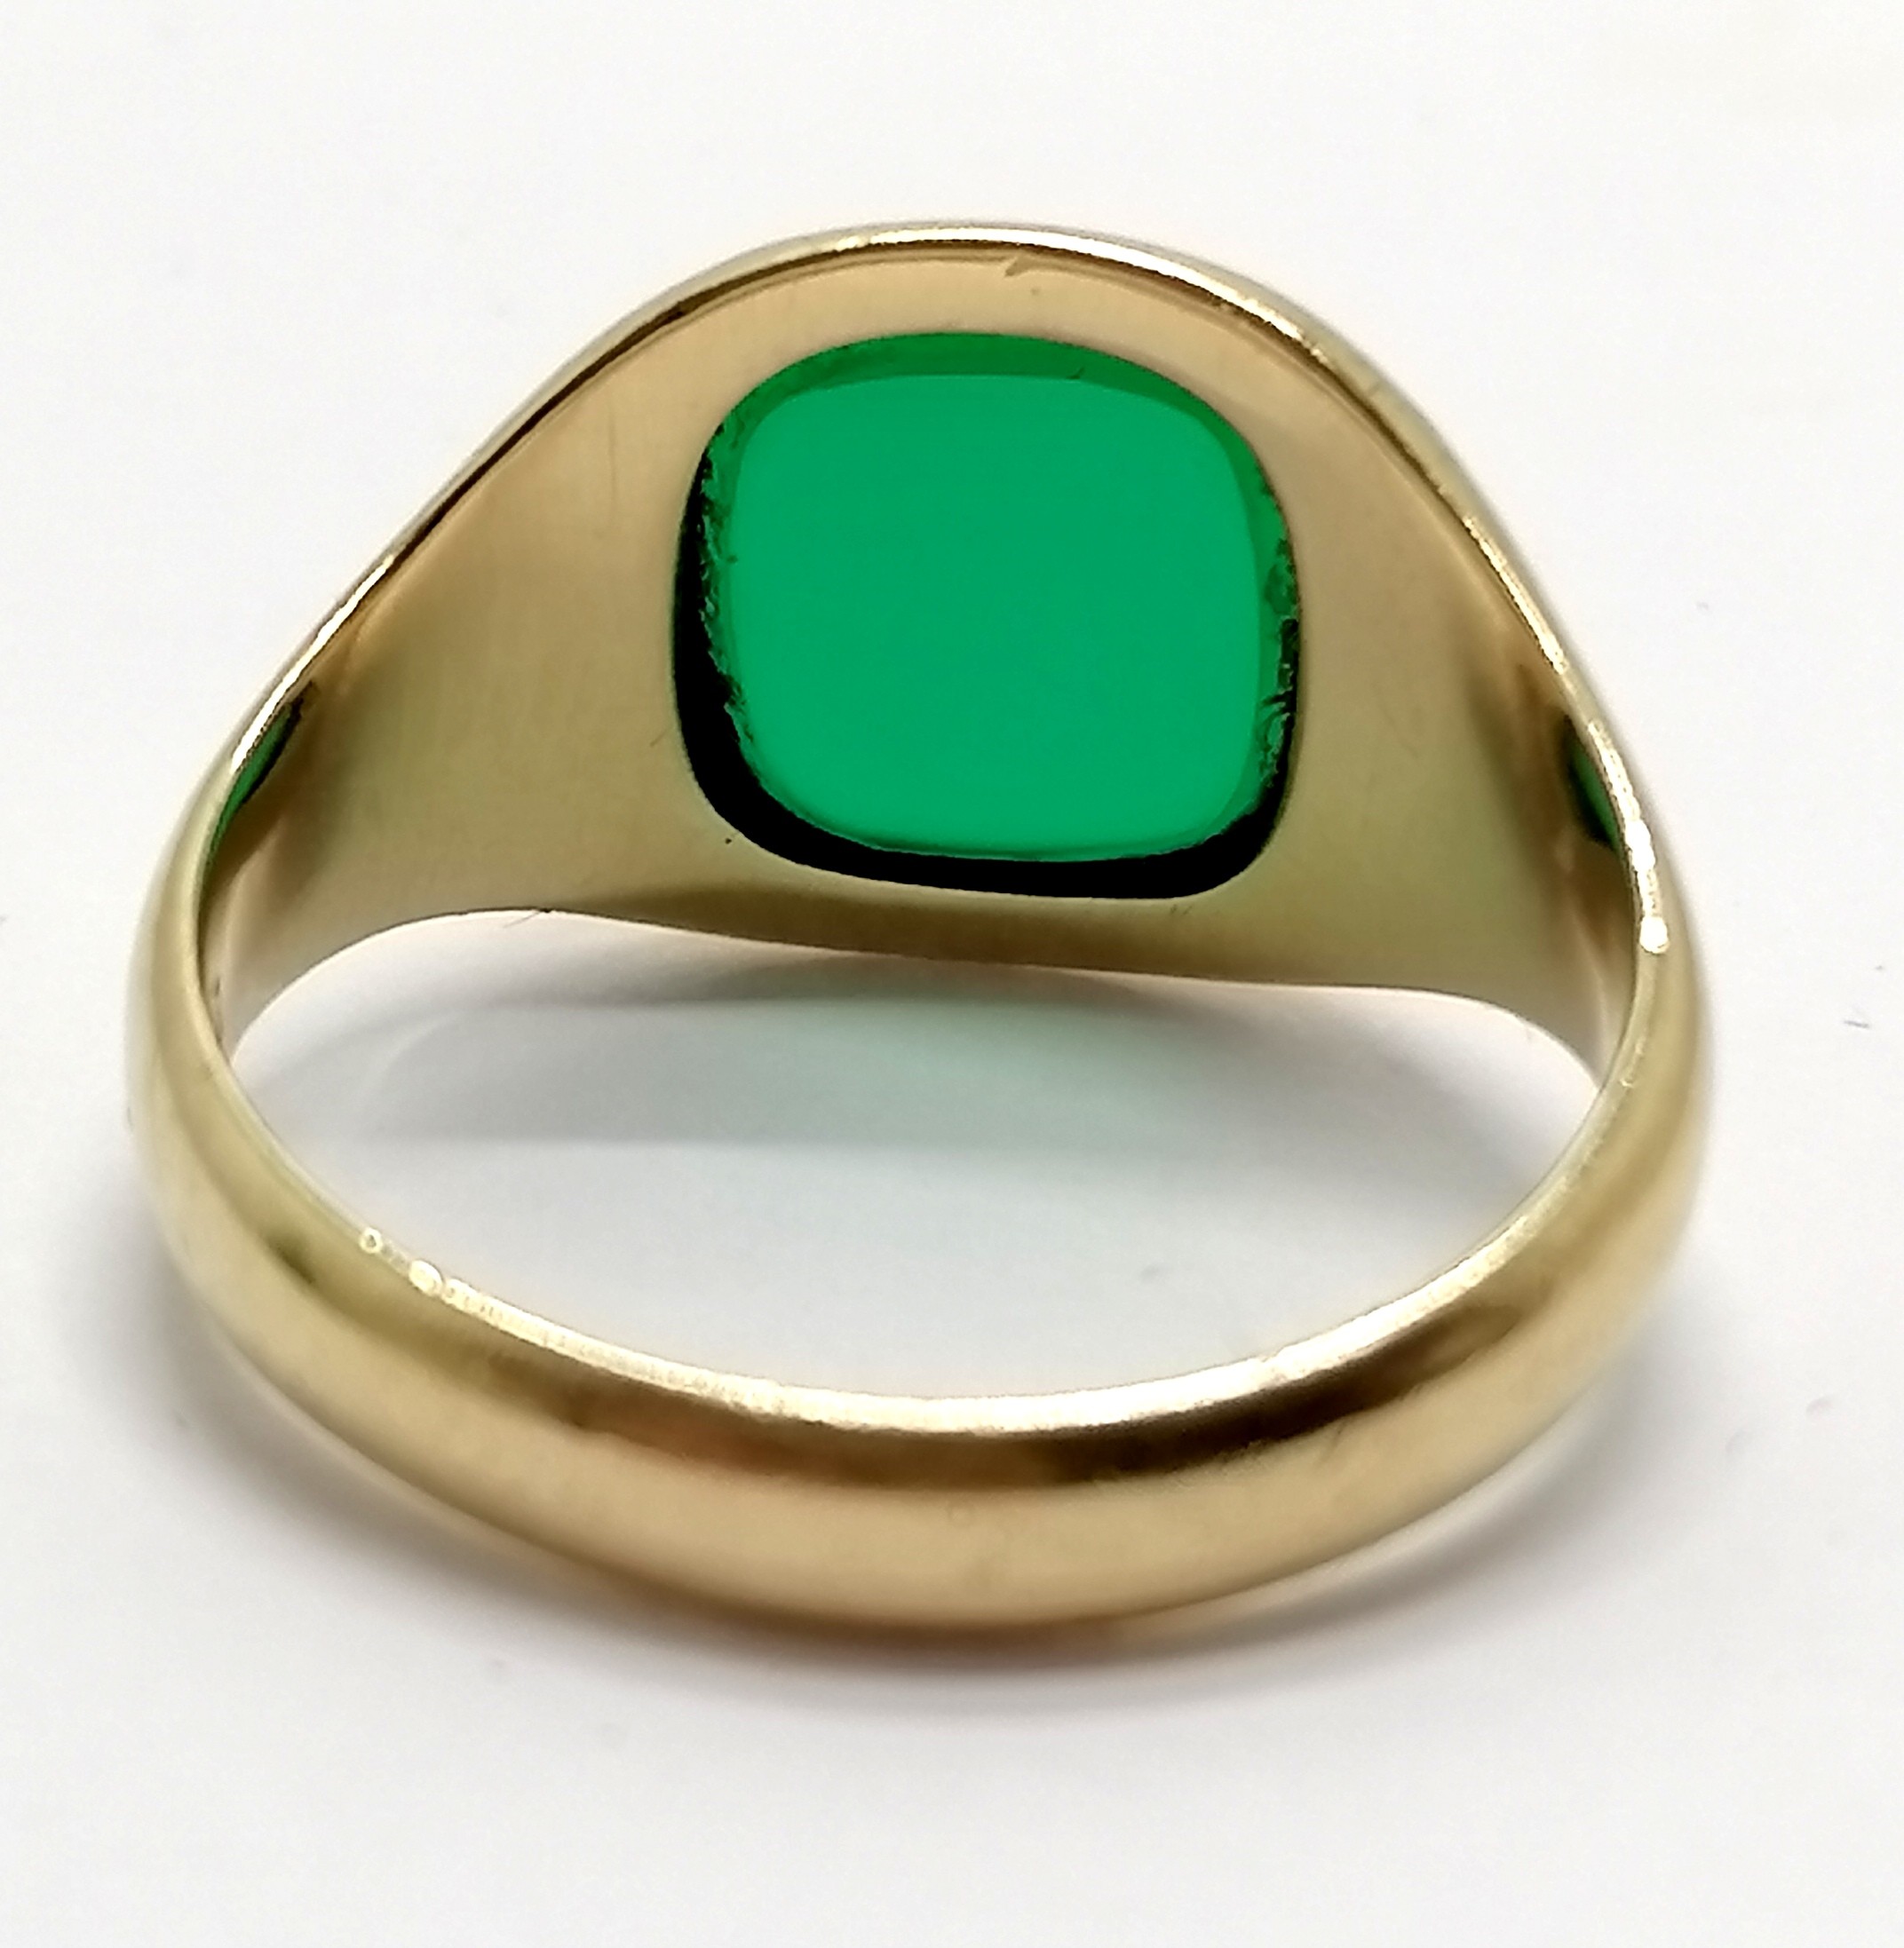 1961 9ct hallmarked gold green agate set signet ring - size U & 6.2g total weight - Image 2 of 3